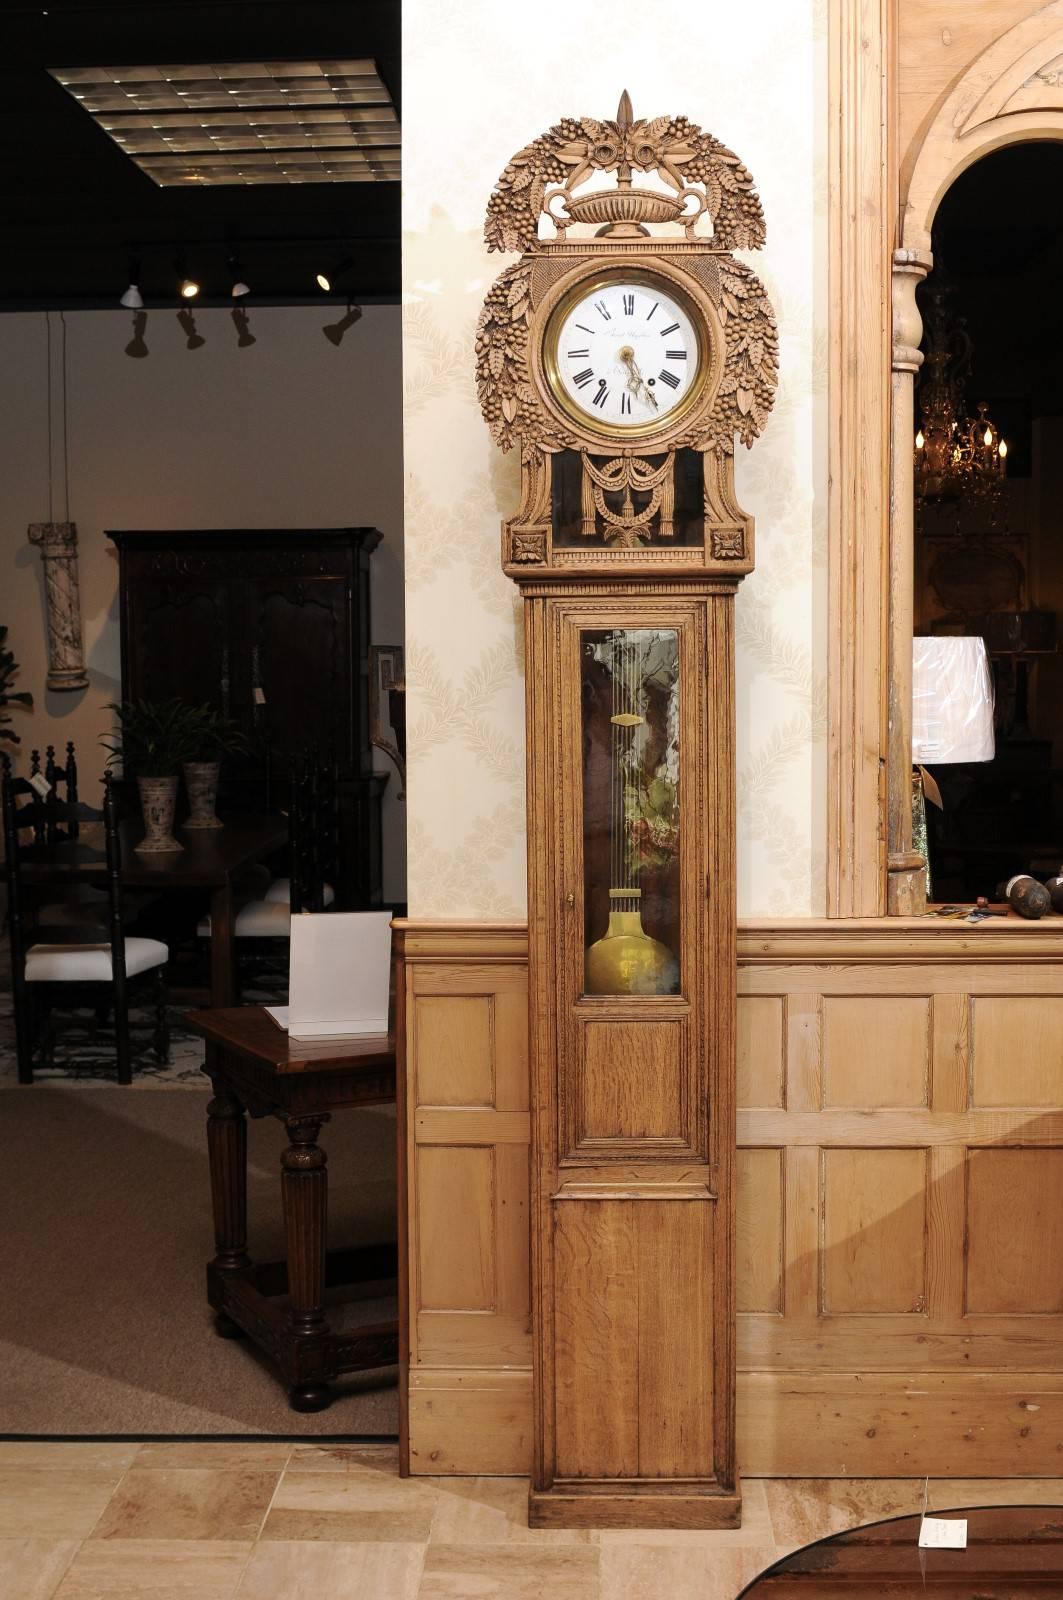 19th century carved oak tall case clock from Normandy

This type of clock is called a St. Nicolas clock as it was made in St. Nicolas-d' Aliermont near the Normandy Coast. The style is known for the beautifully carved headdress surrounding the face